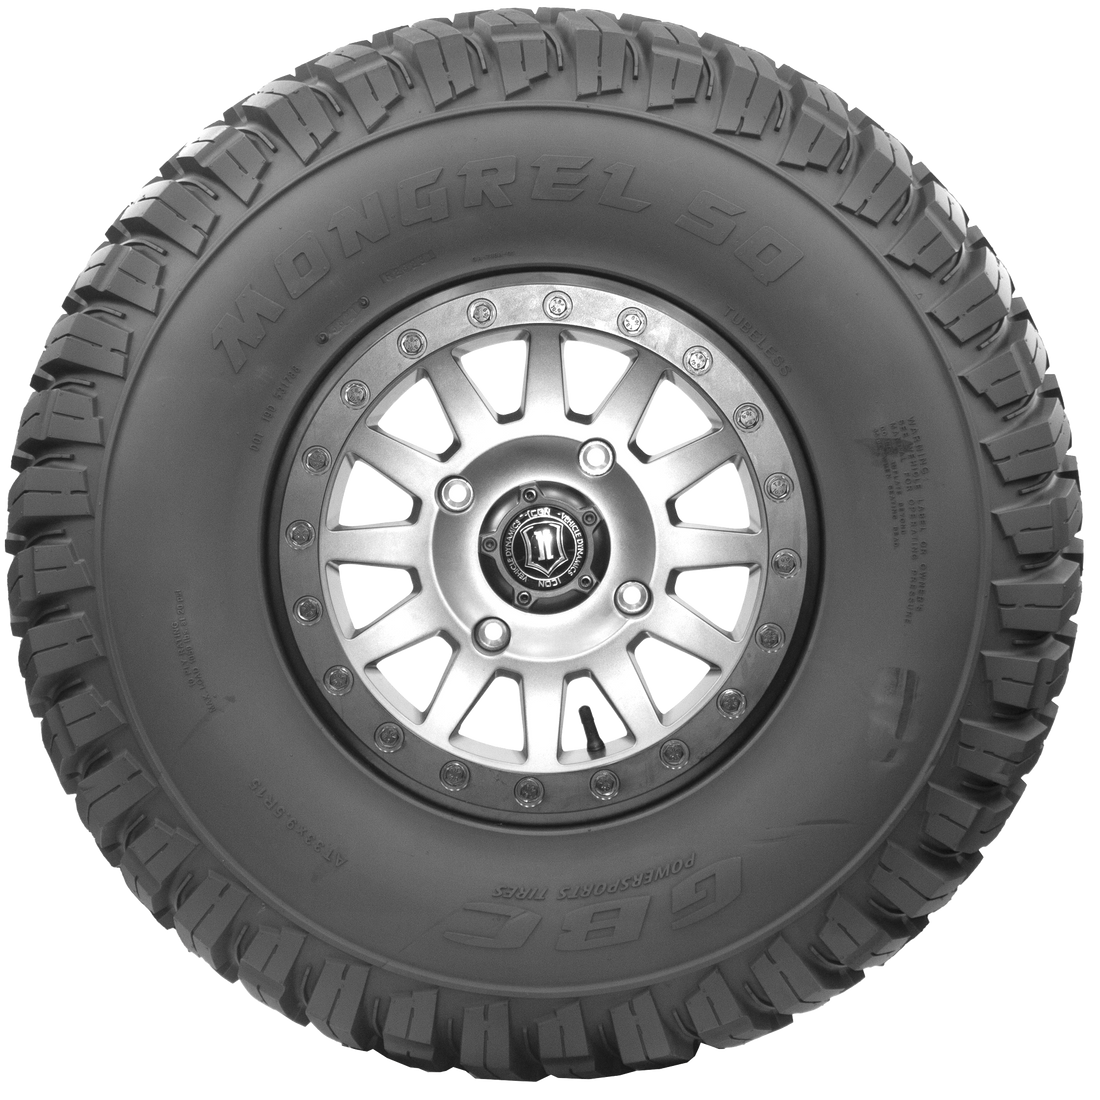 Sideview of Mongrel SQ ATV/UTV tire, displaying the innovative square lugs that extend across the tread and down to the sidewall. The lugs provide significant speed and braking power, even for today's faster machines. The image also shows a generous rim guard for optimal protection against damage.